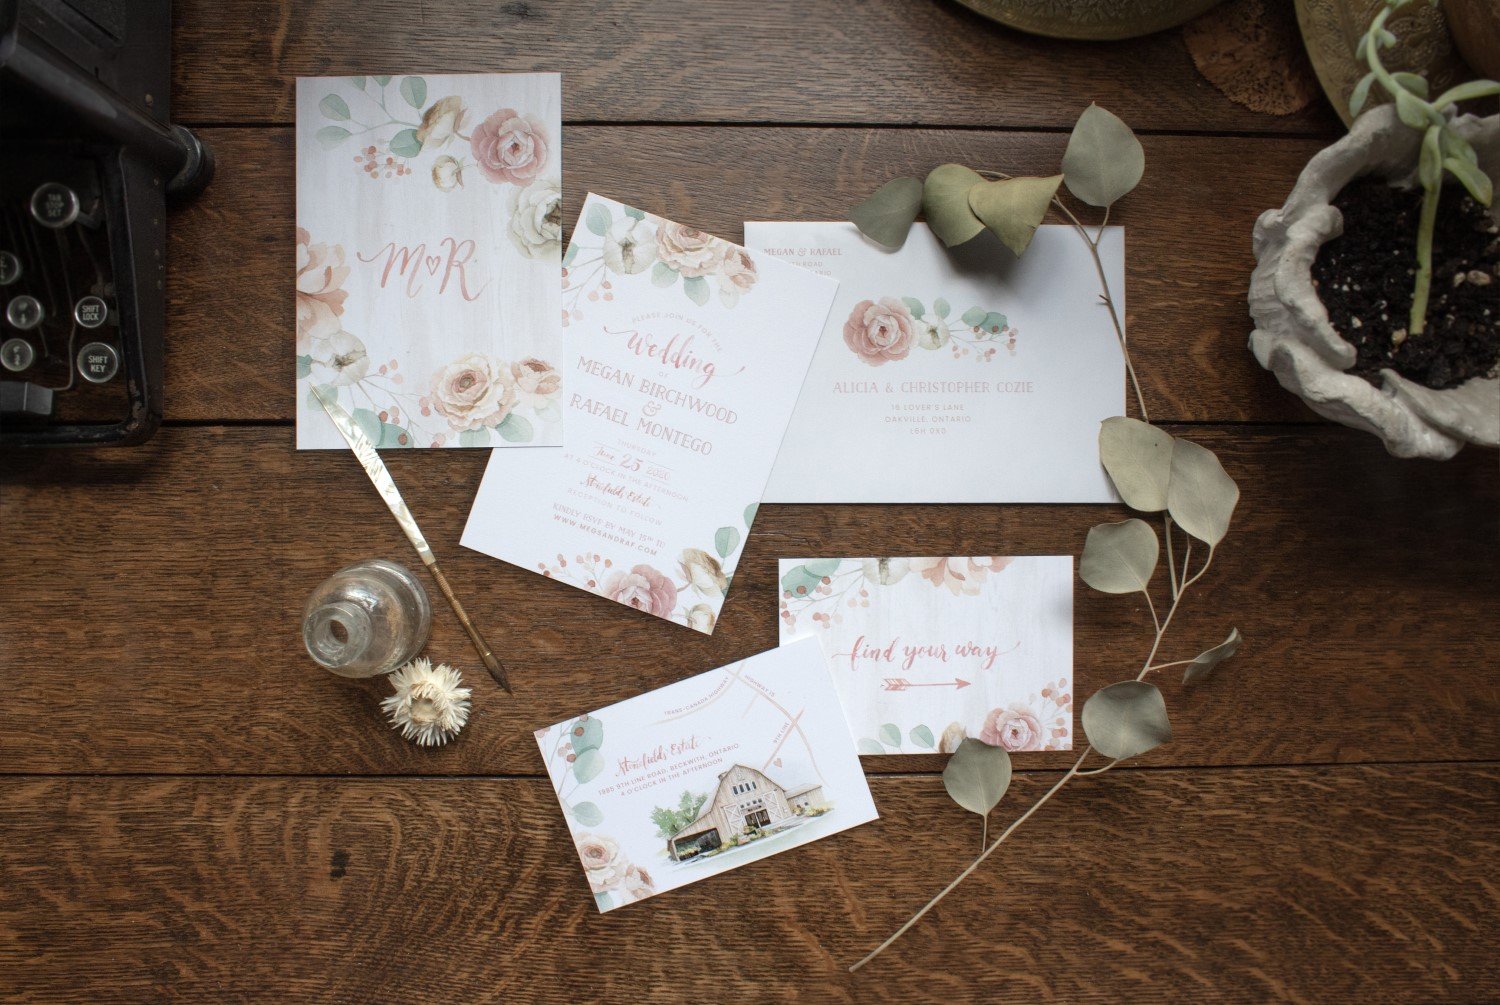 Rustic Whitewashed Barnboard with Florals